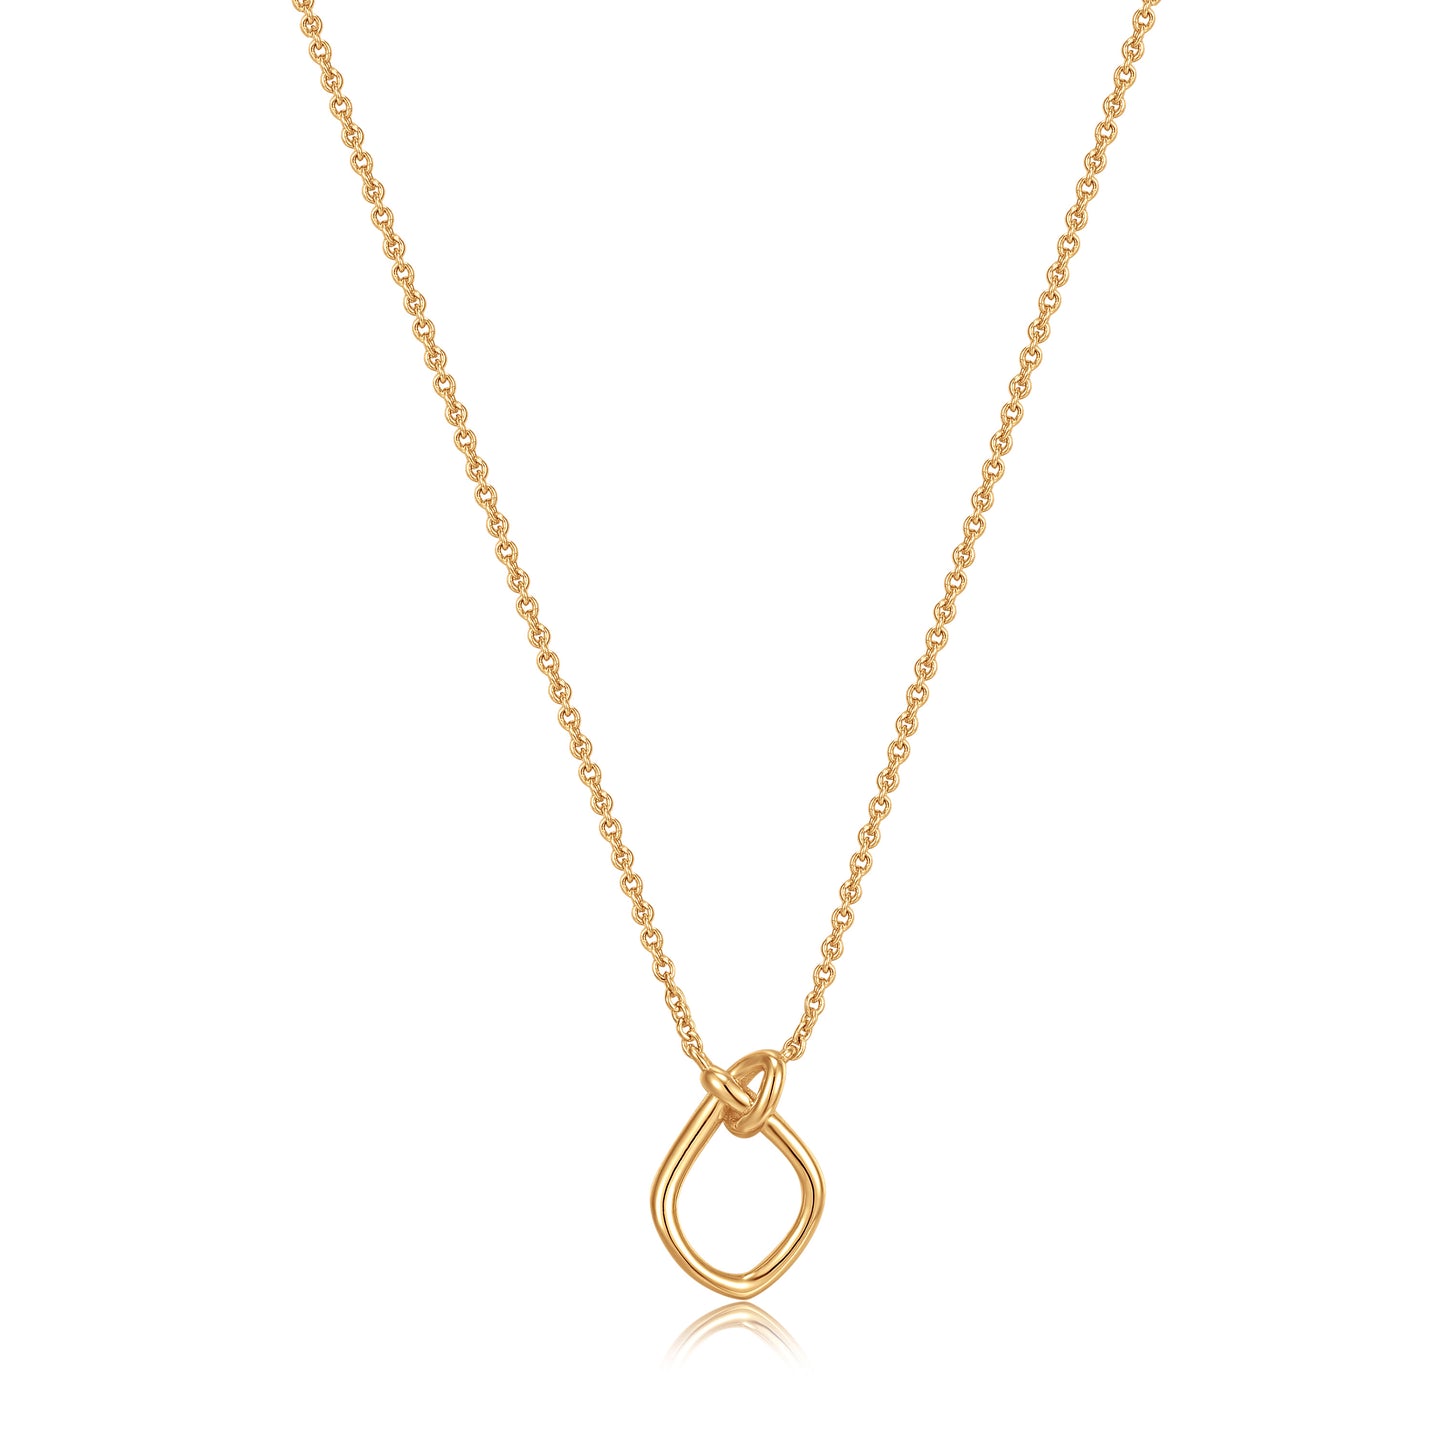 ANIA HAIE ANIA HAIE - Gold Knot Pendant Necklace available at The Good Life Boutique